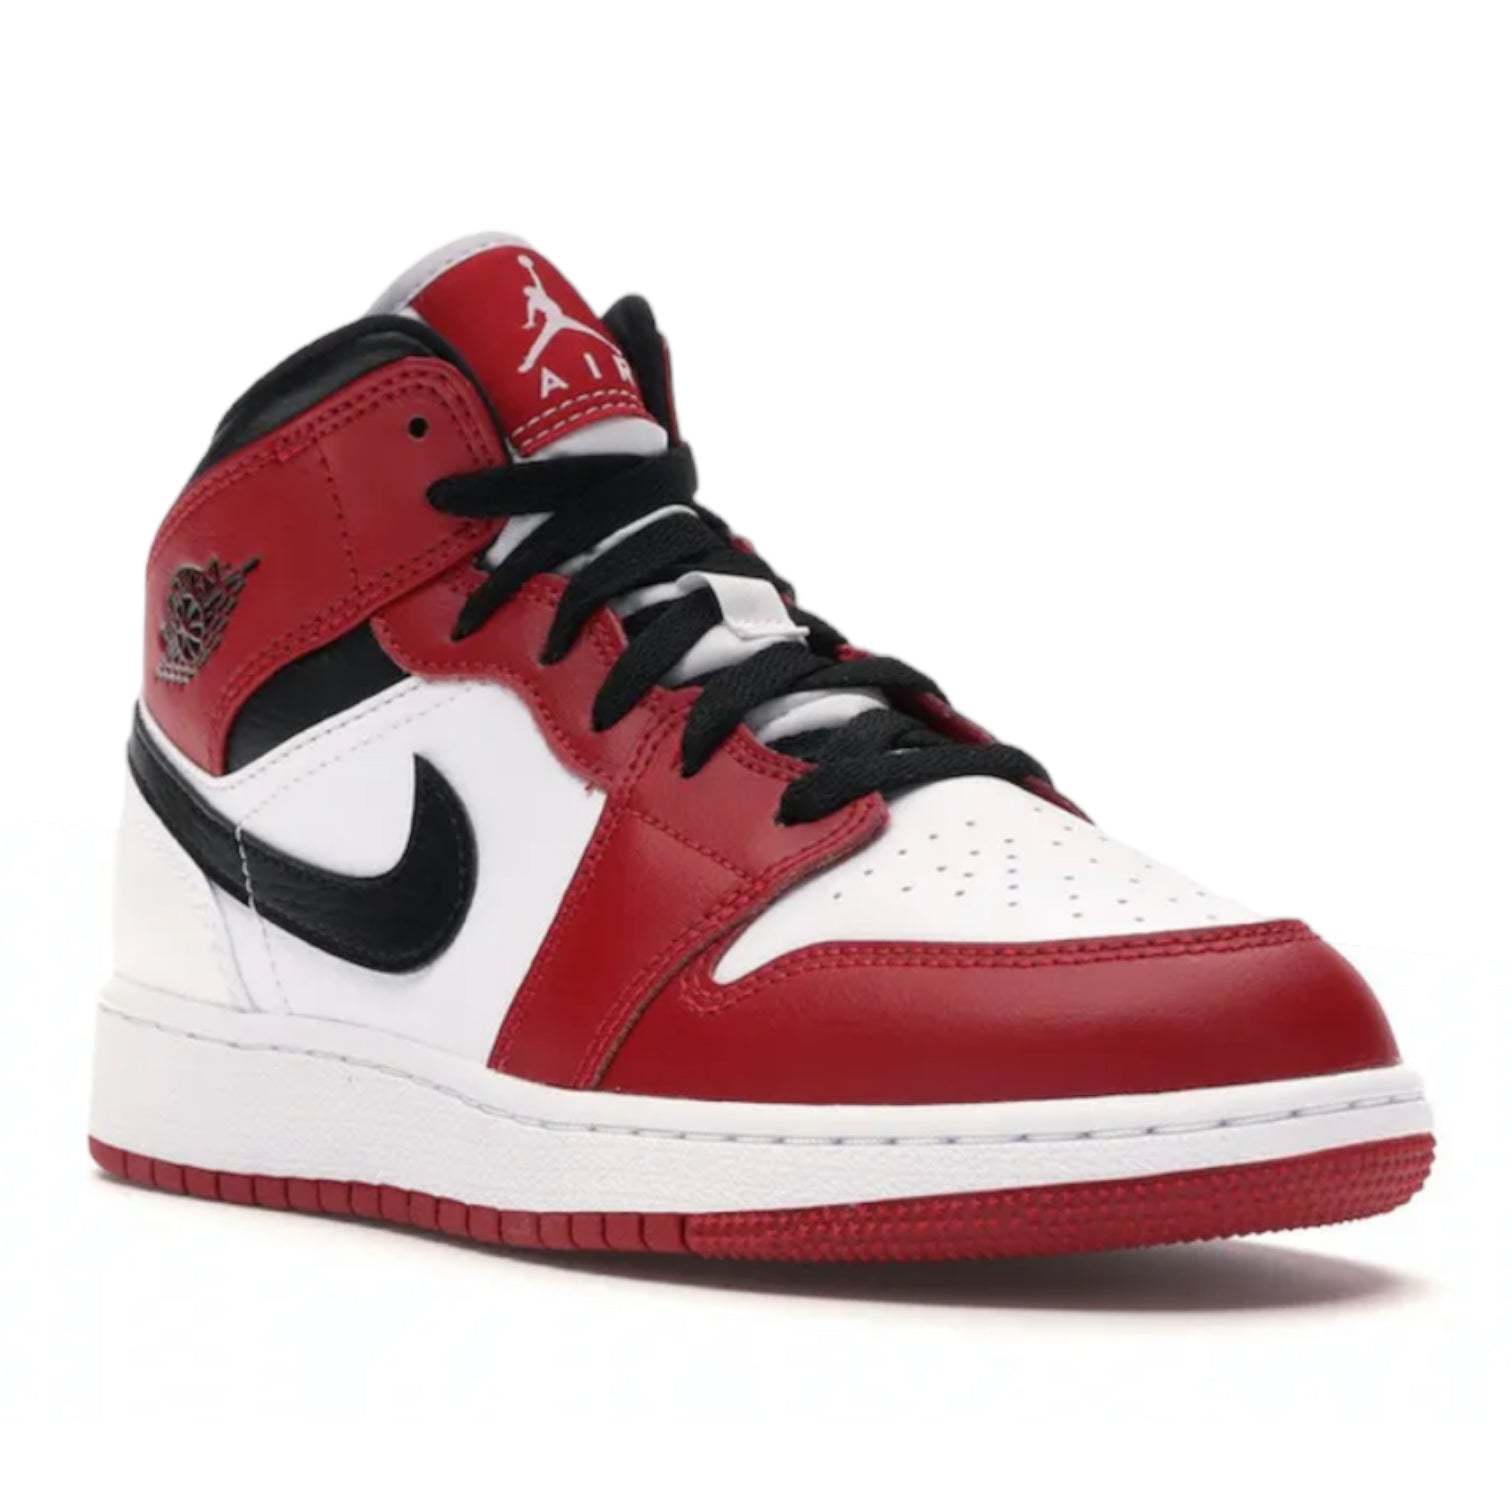 Jordan 1 Mid Chicago White Heel - Red and White Sneakers (Steal)